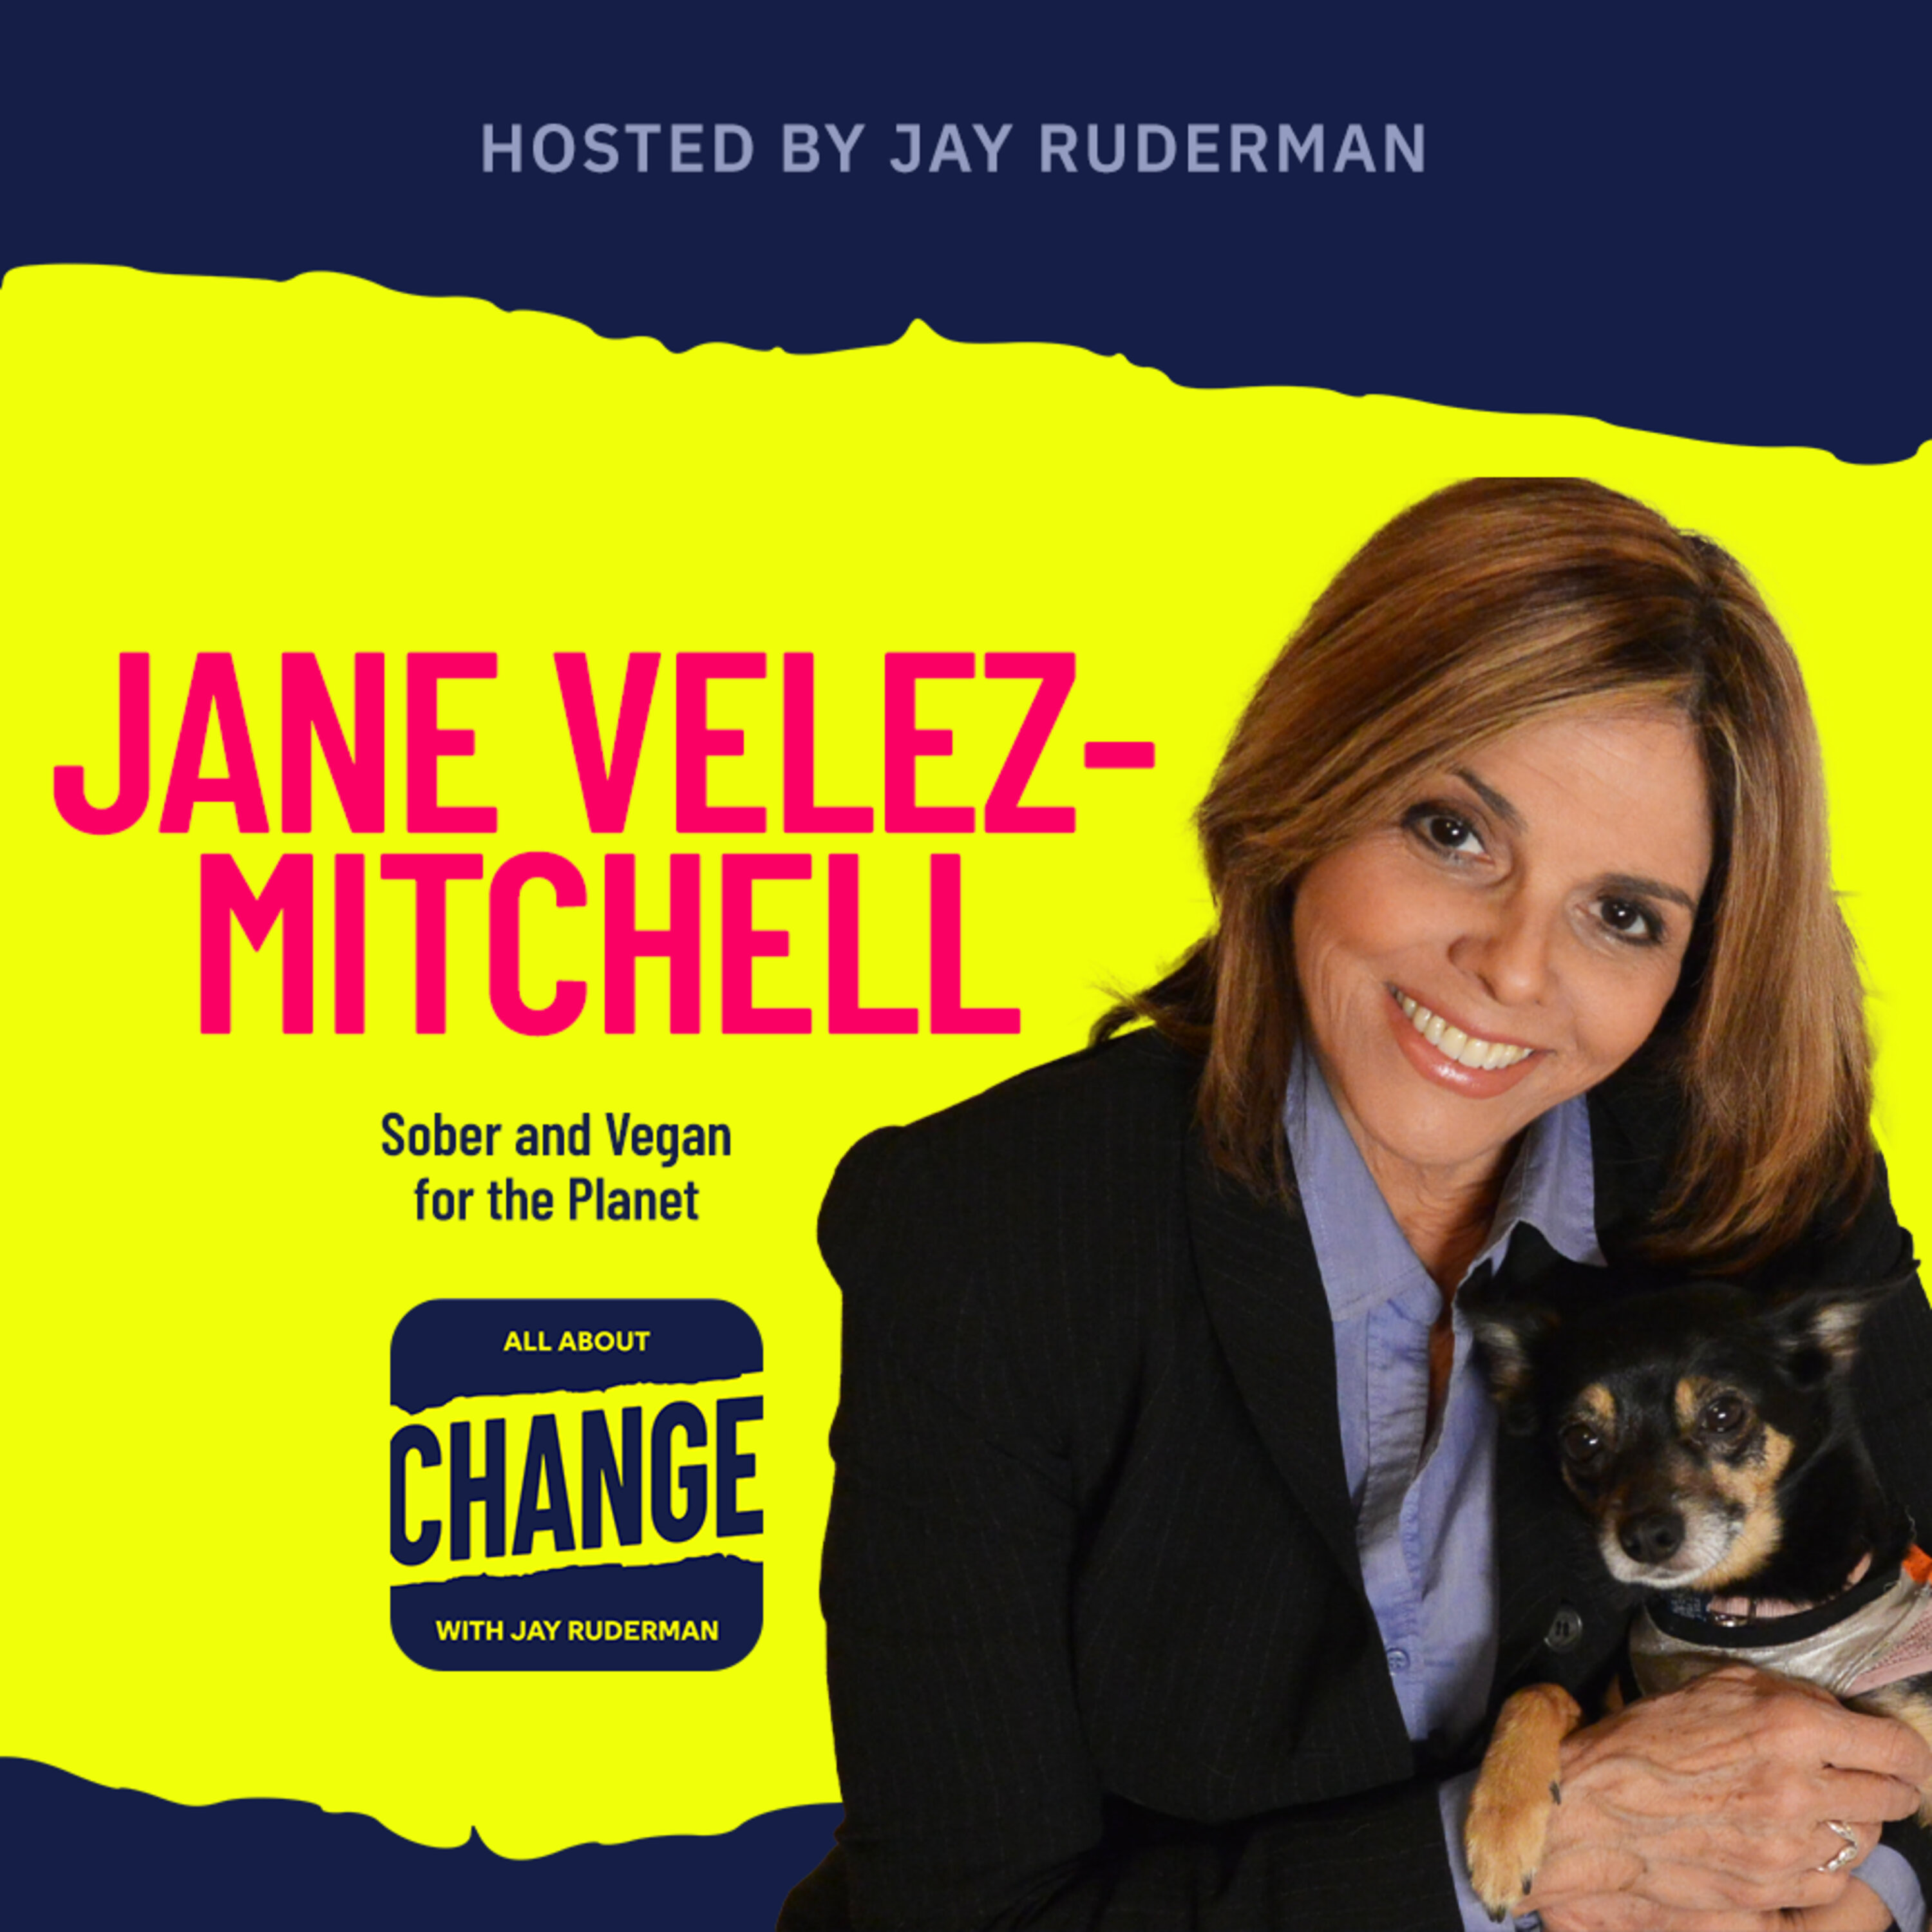 Jane Velez-Mitchell - Sober and Vegan for the Planet